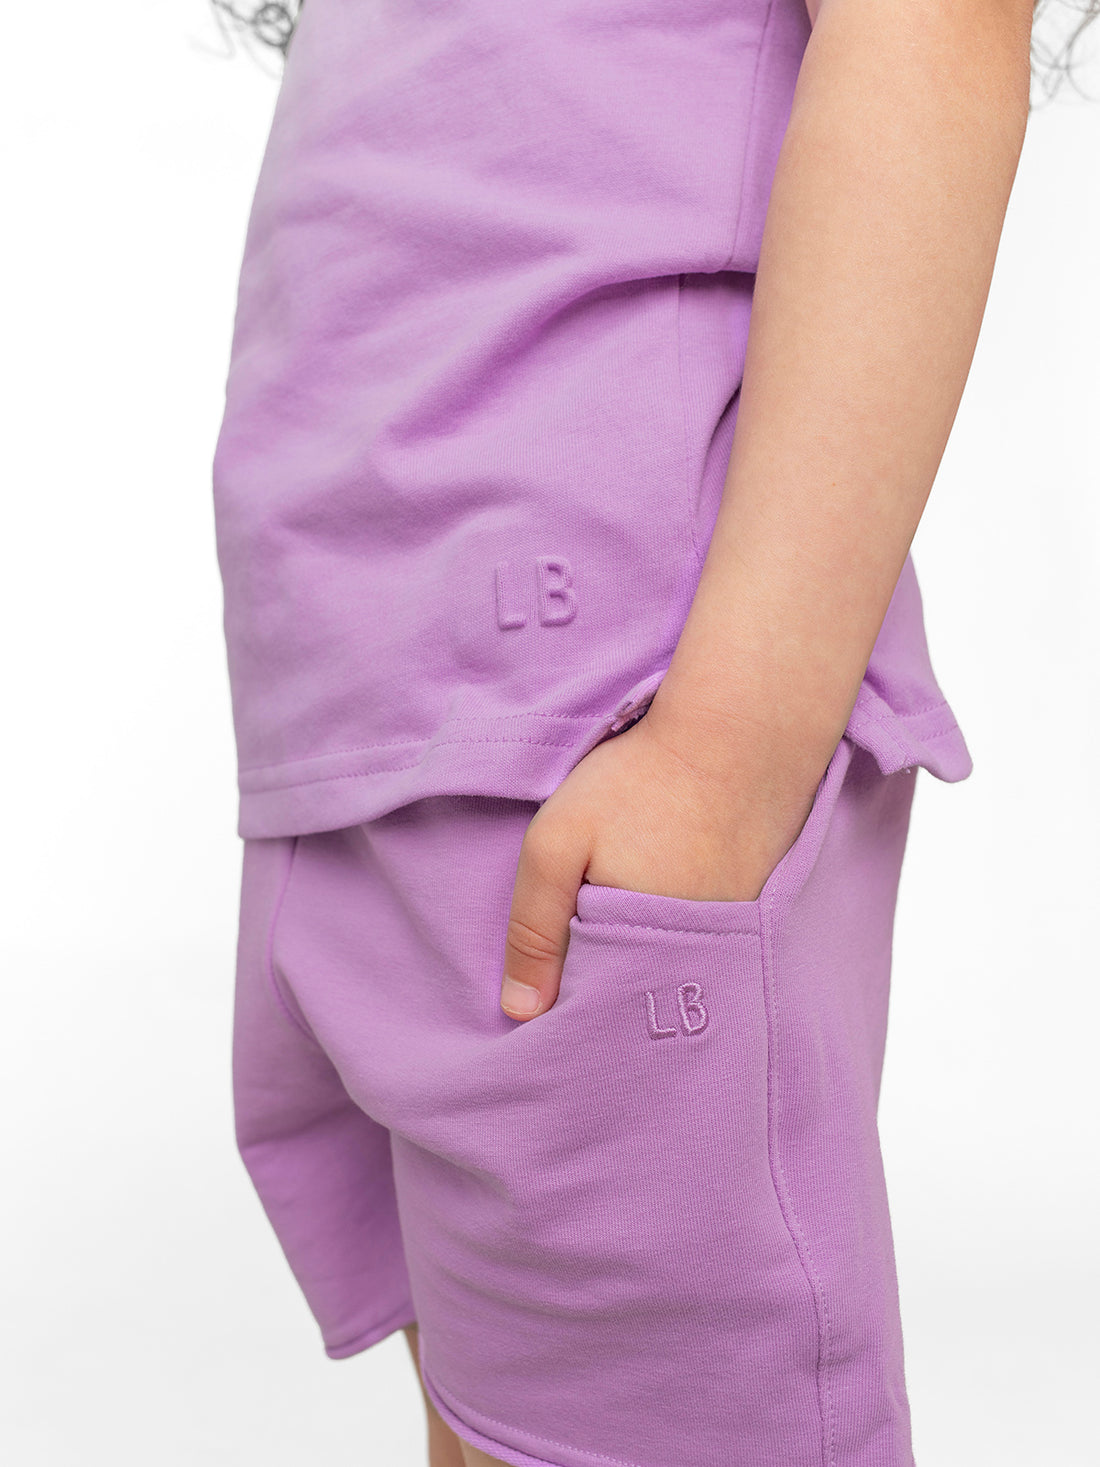 Little Bipsy Elevated Tank Top: Electric Lilac